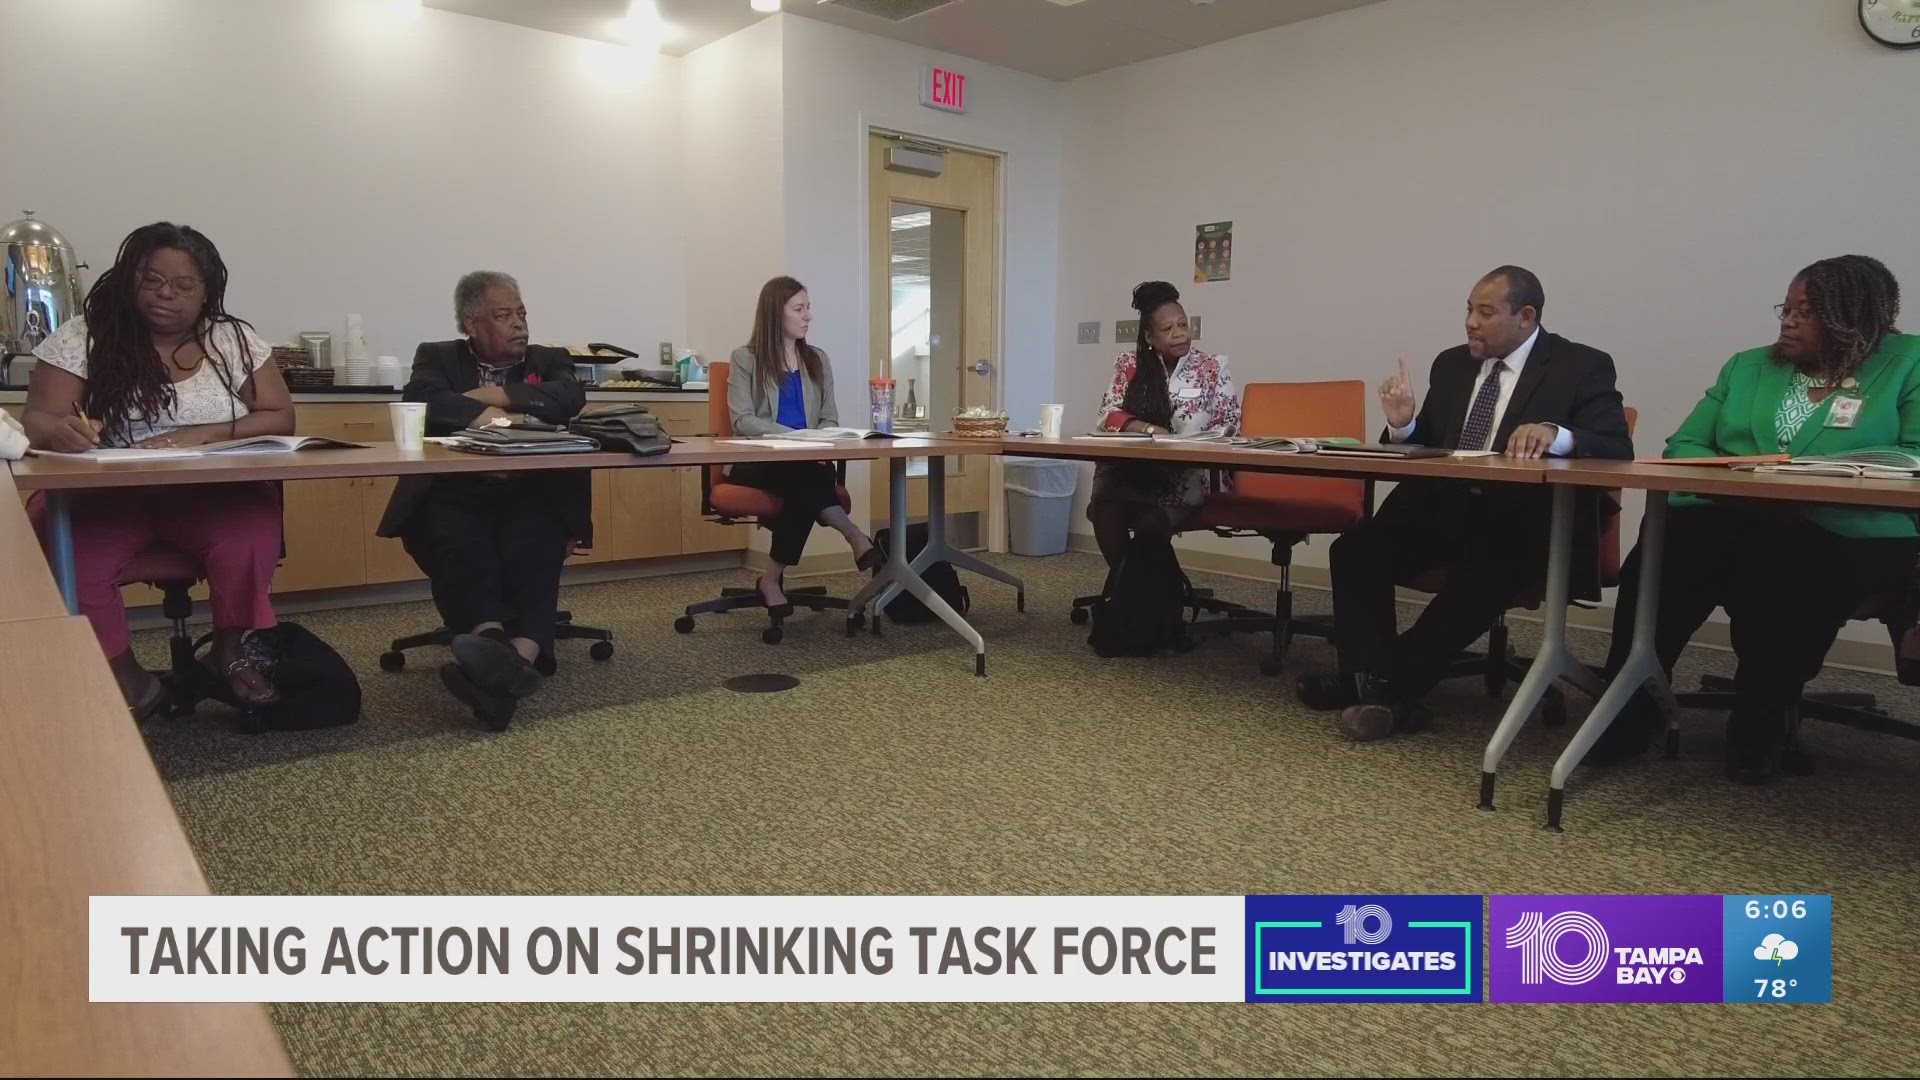 Last week, 10 Investigates uncovered the state Task Force’s membership has been shrinking for years.